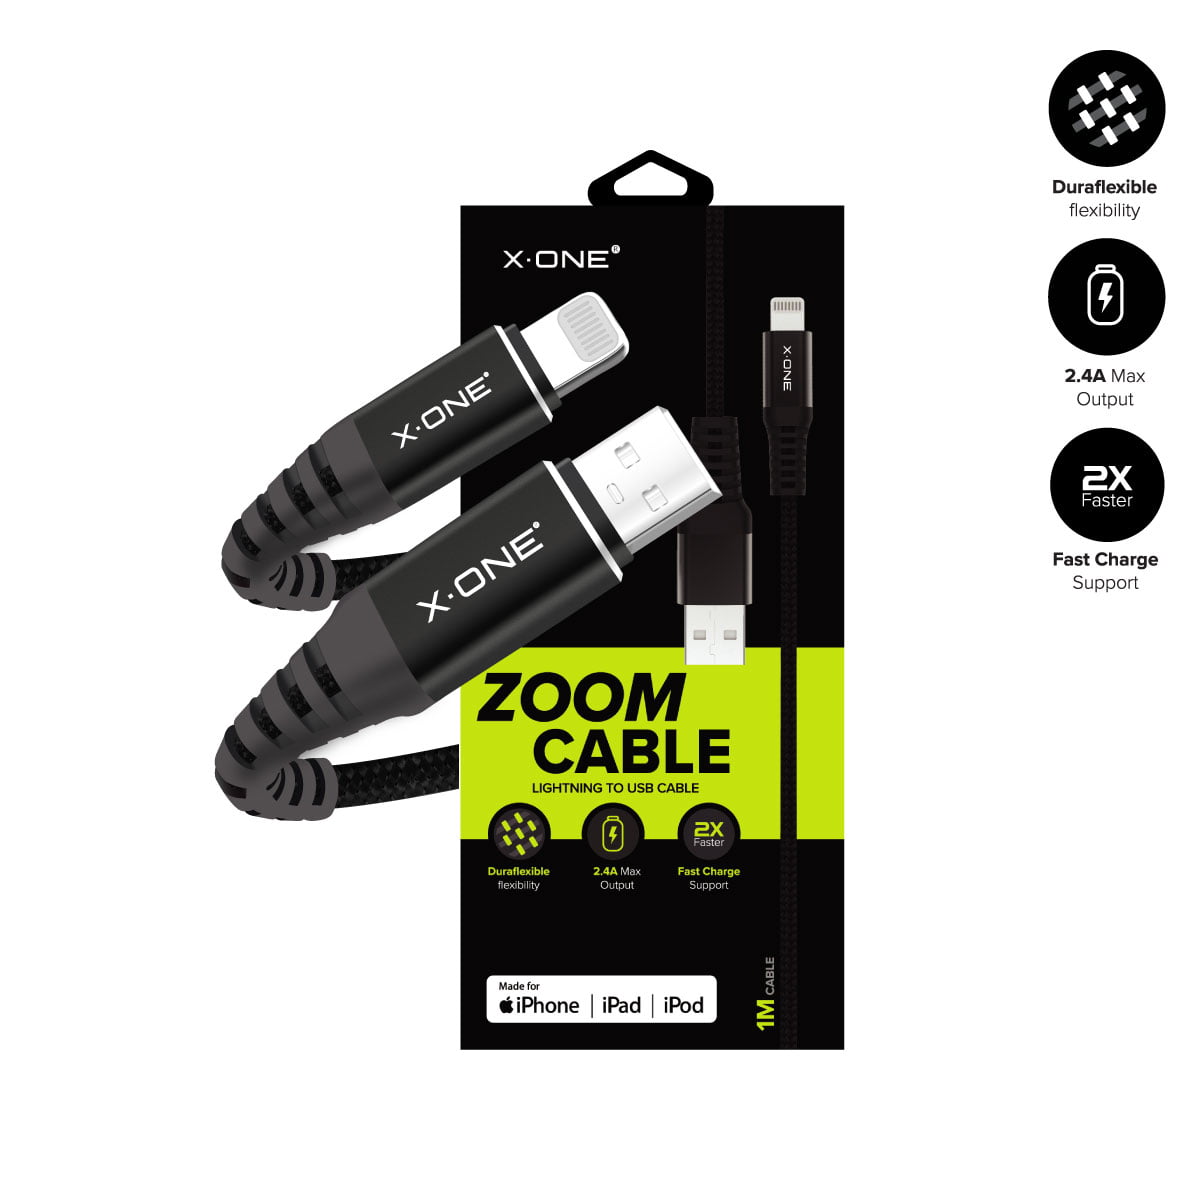 XONE Zoom Cable 1